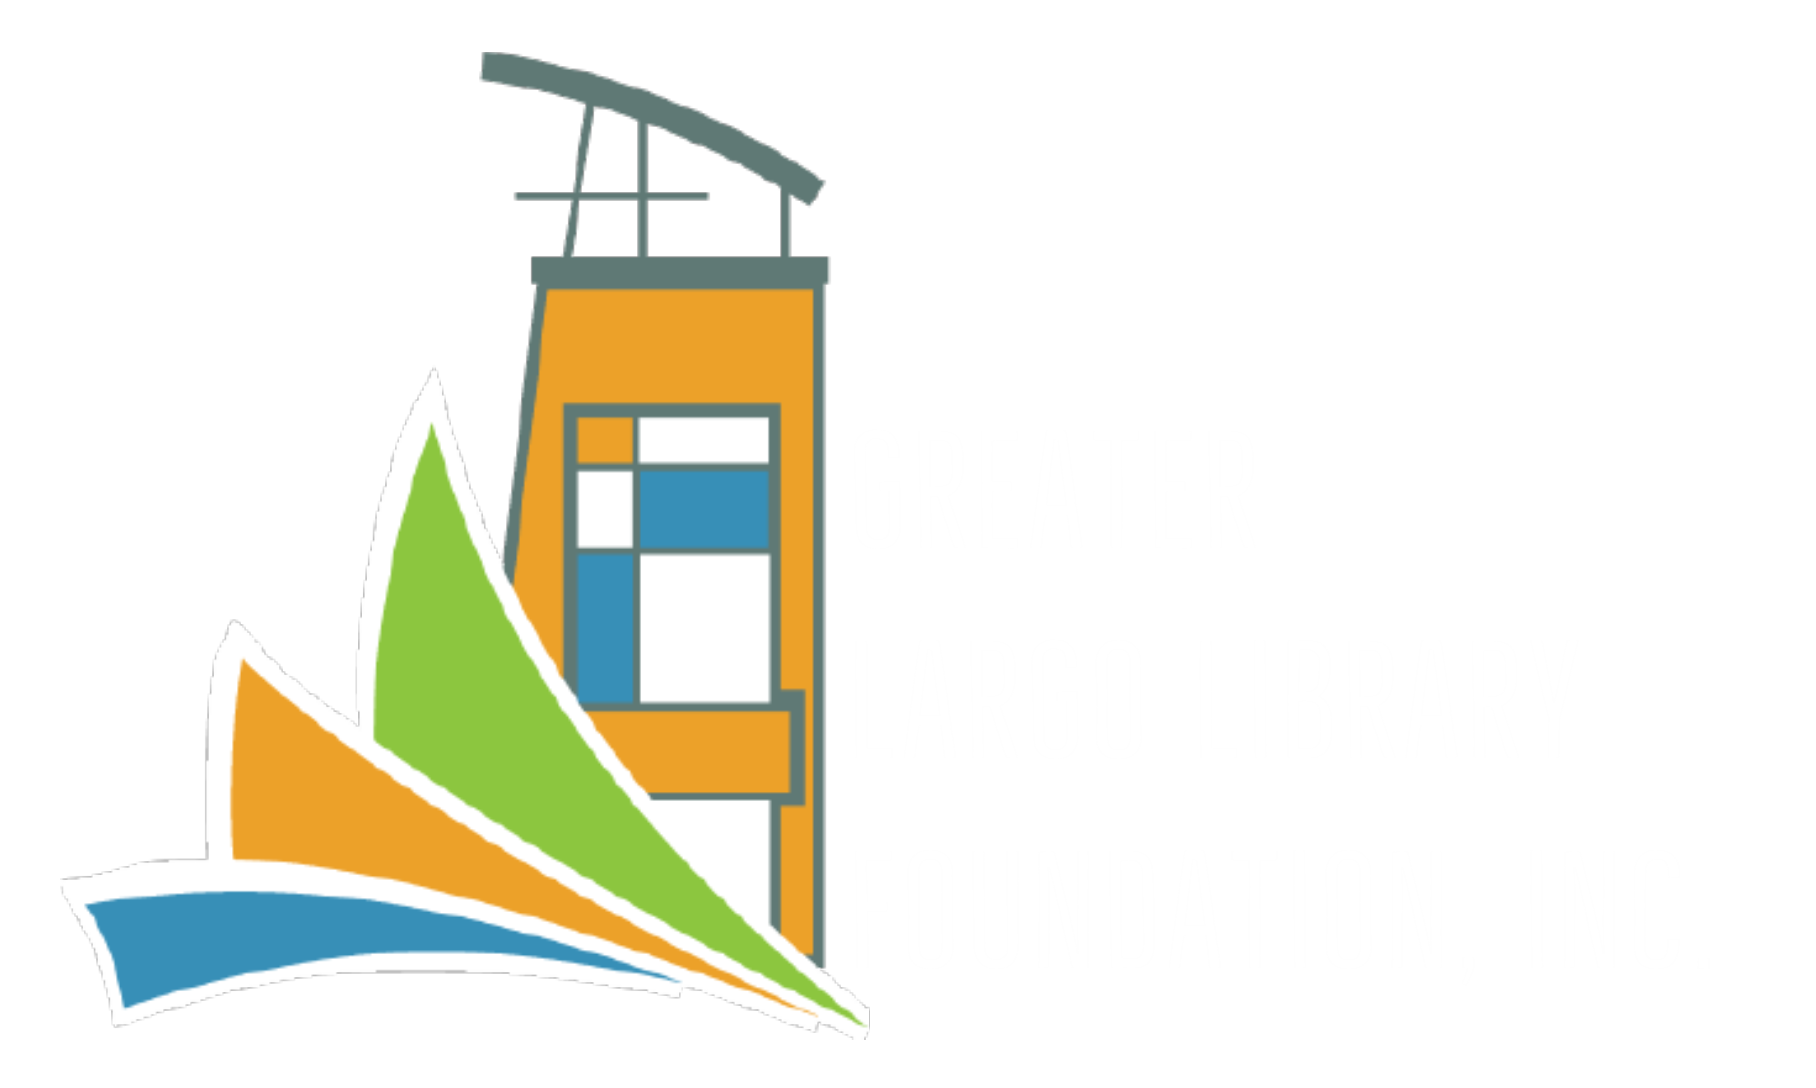 Greater Largo Library Foundation